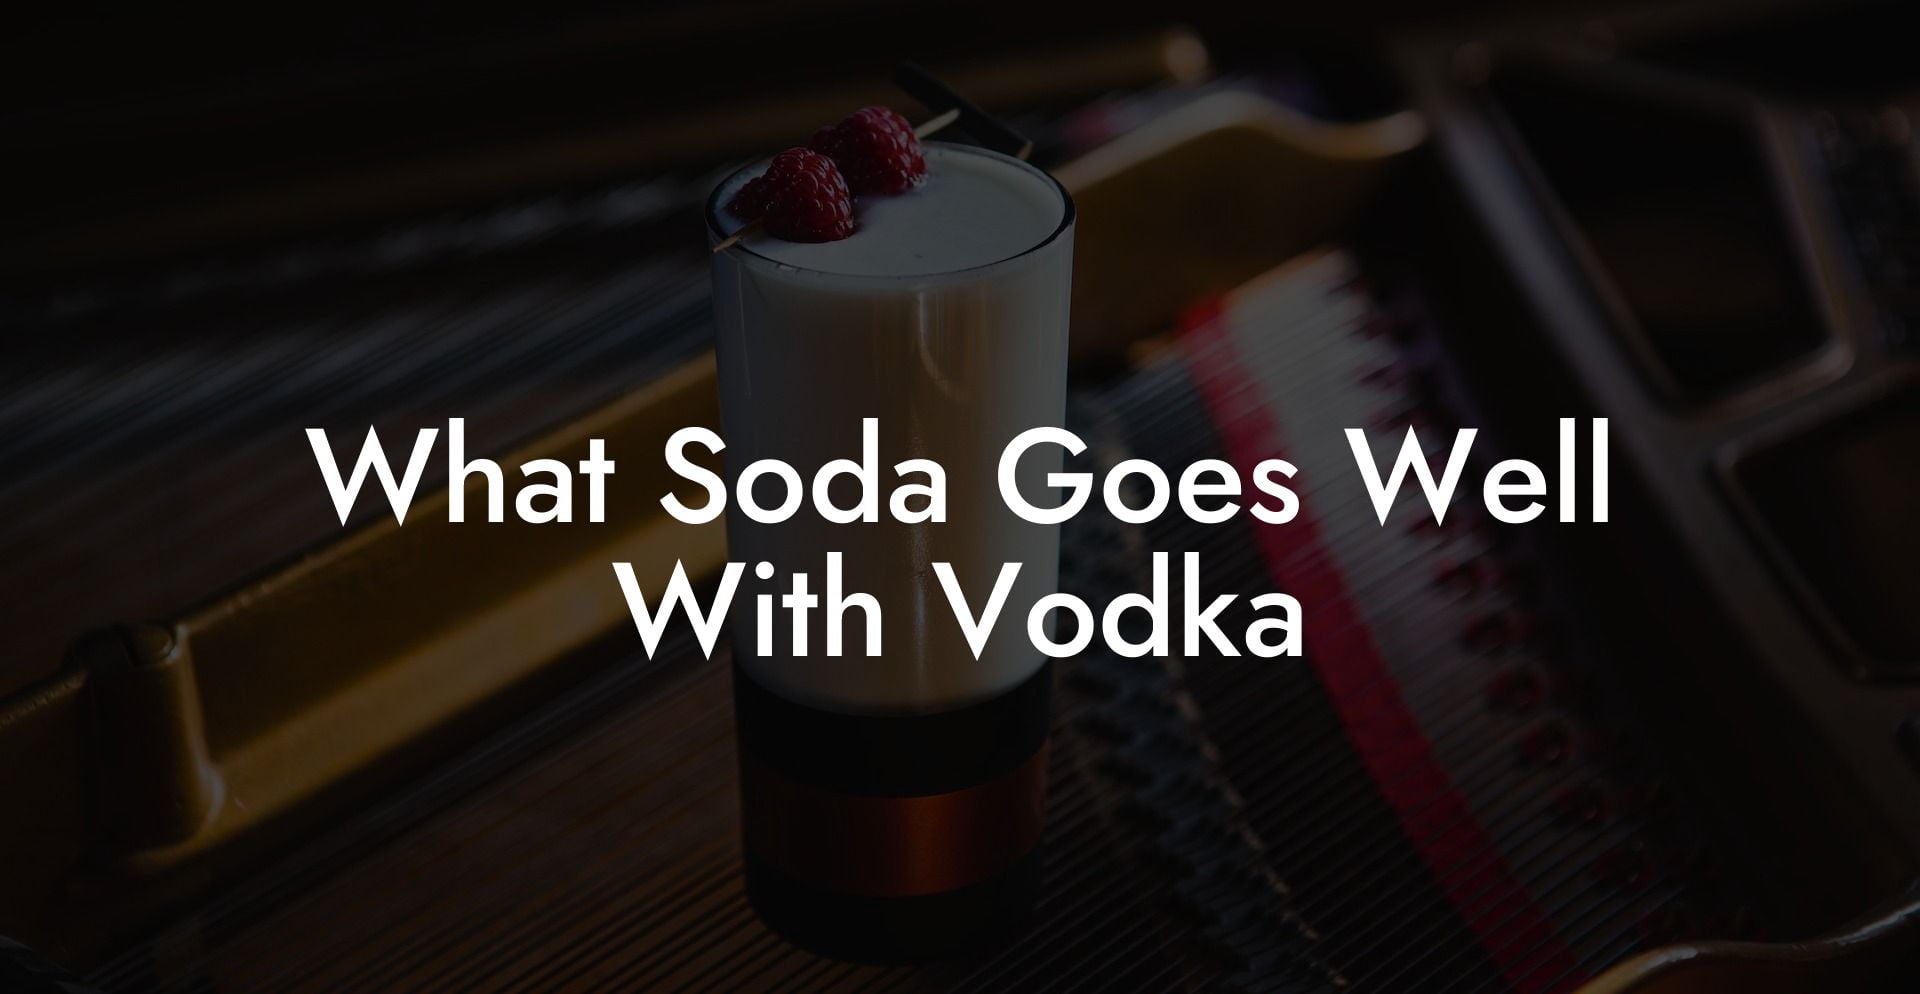 What Soda Goes Well With Vodka